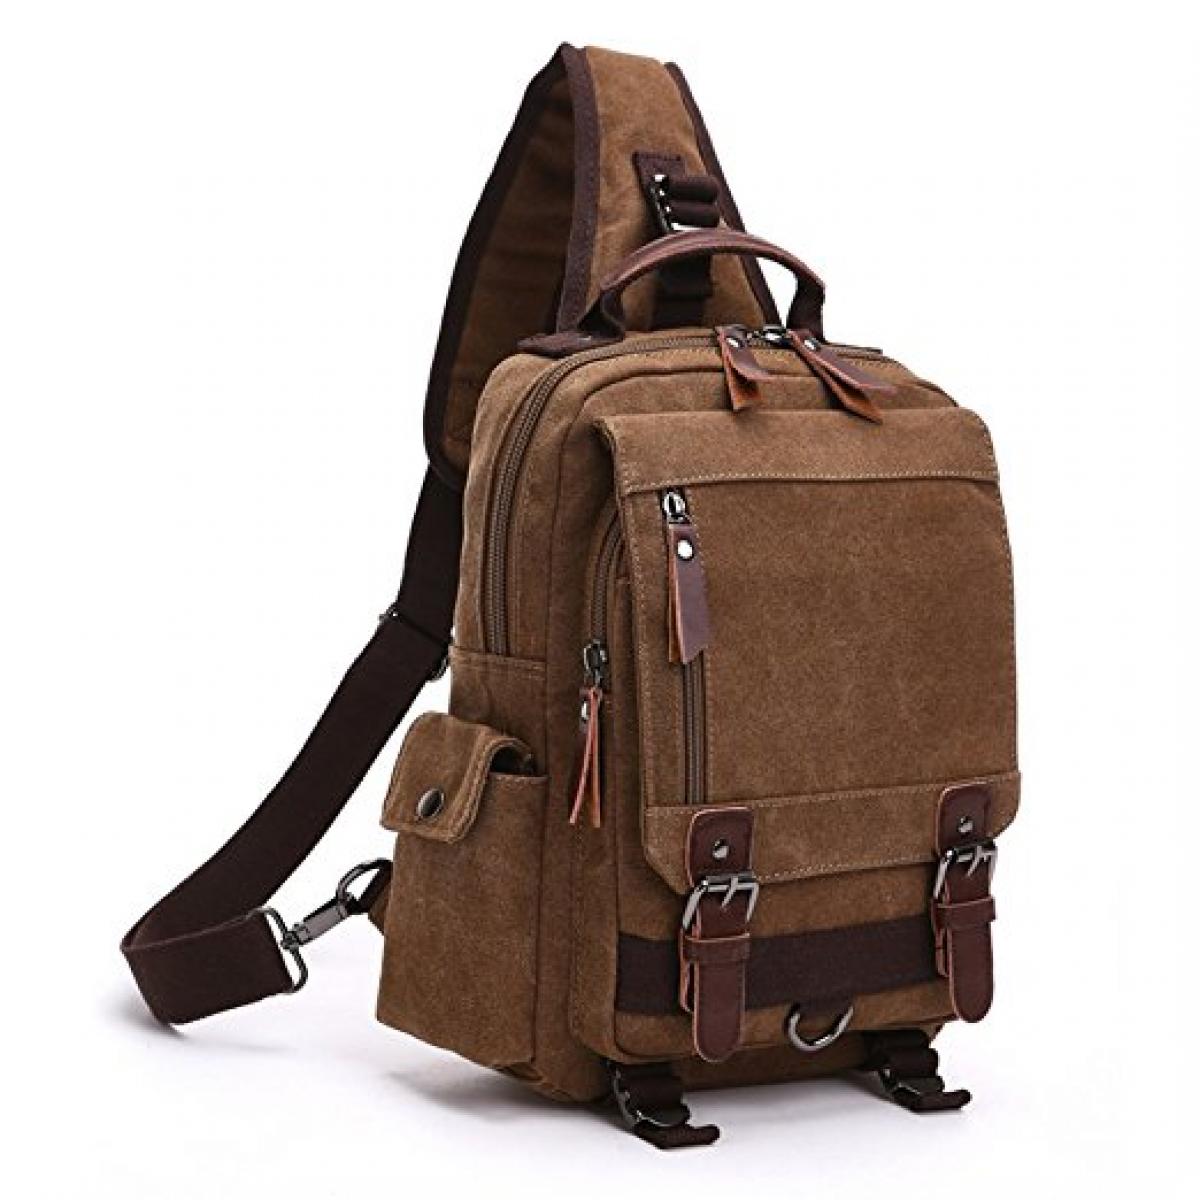 Dececos Casual Sling Bag Canvas Backpack 